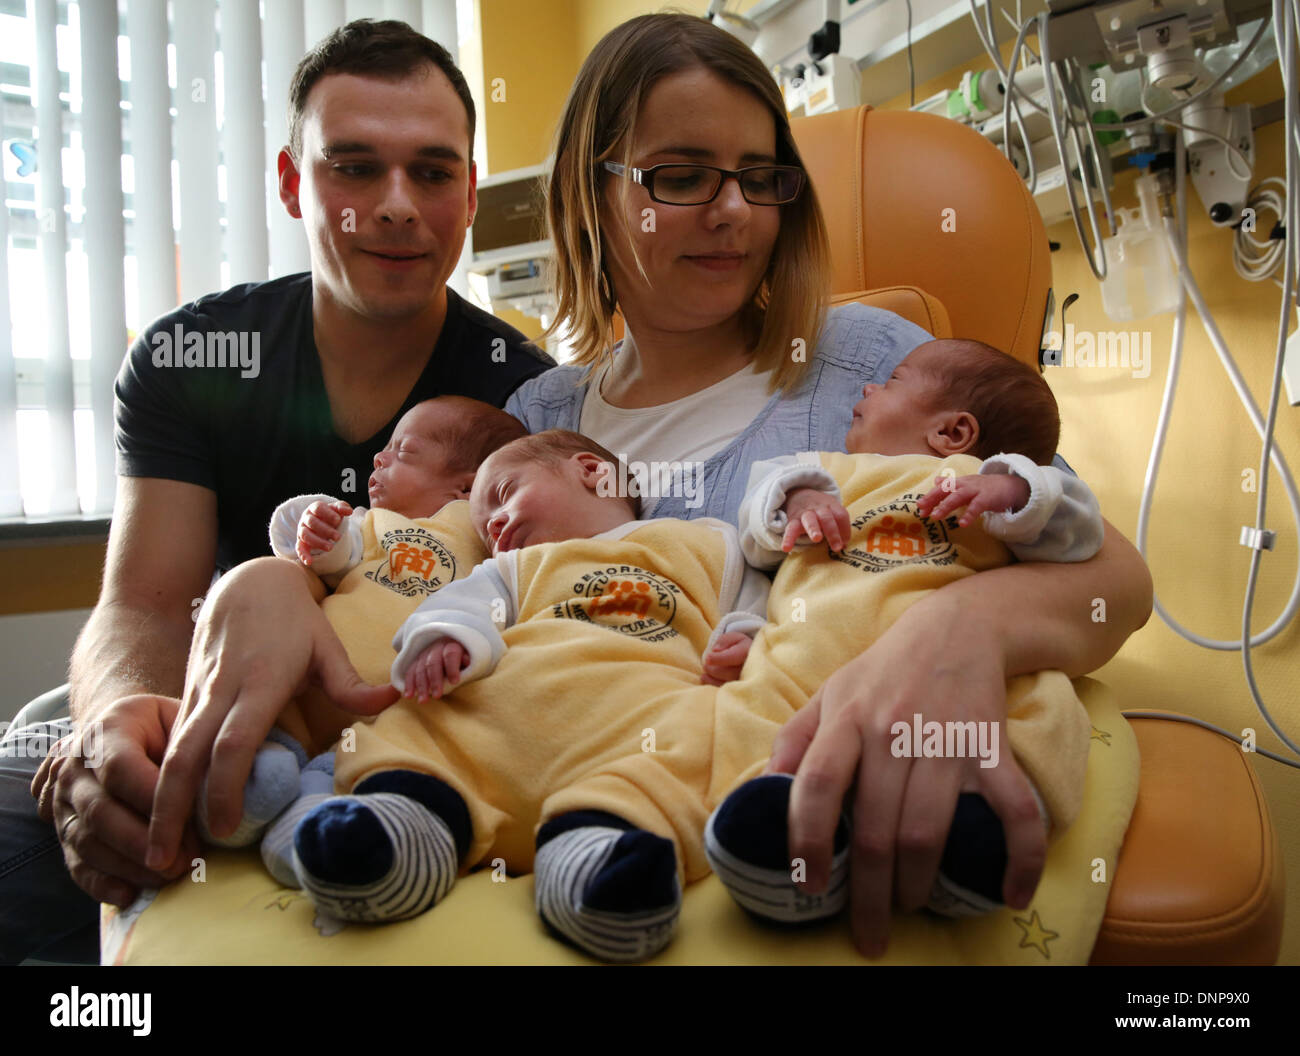 The triplets (L-R) Till, Max and Ben lie in the arms of their parents Thomas and Marie Osswald in the South City Hospital in Rostock, Germany, 03 January 2014. Four months after their birth on 06 September 2013, the triplets are now discharged home. The boys were born with a weight of 1200 to 1320 grams after only 29 weeks of gestation. Photo: Bernd Wuestneck ZB Stock Photo